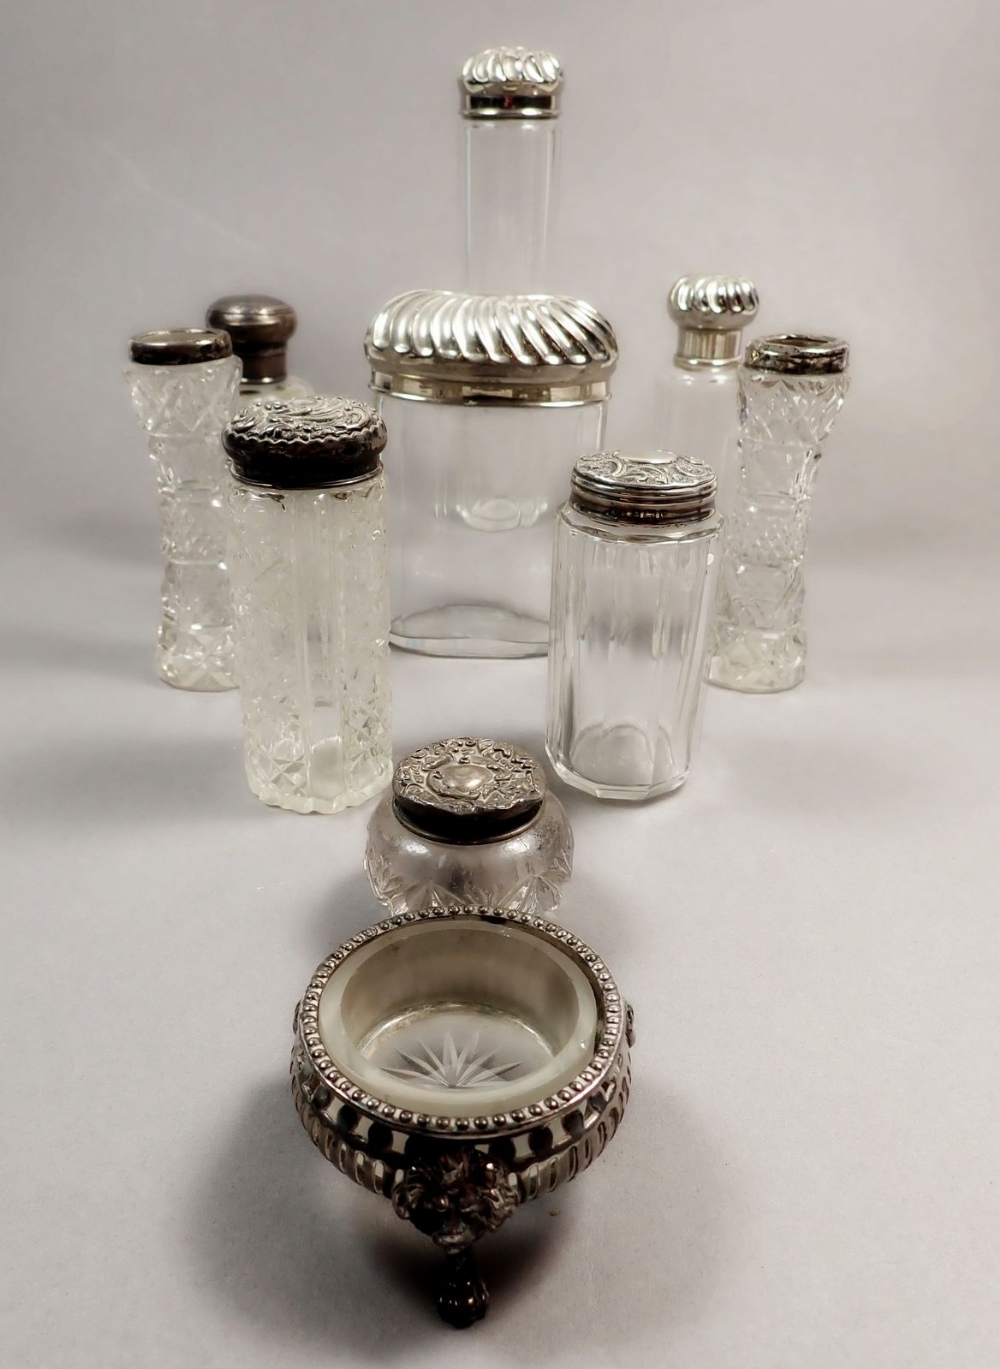 A pair of Edwardian cut glass and silver rimmed posy vases, two cut glass and silver-topped vanity - Image 2 of 2